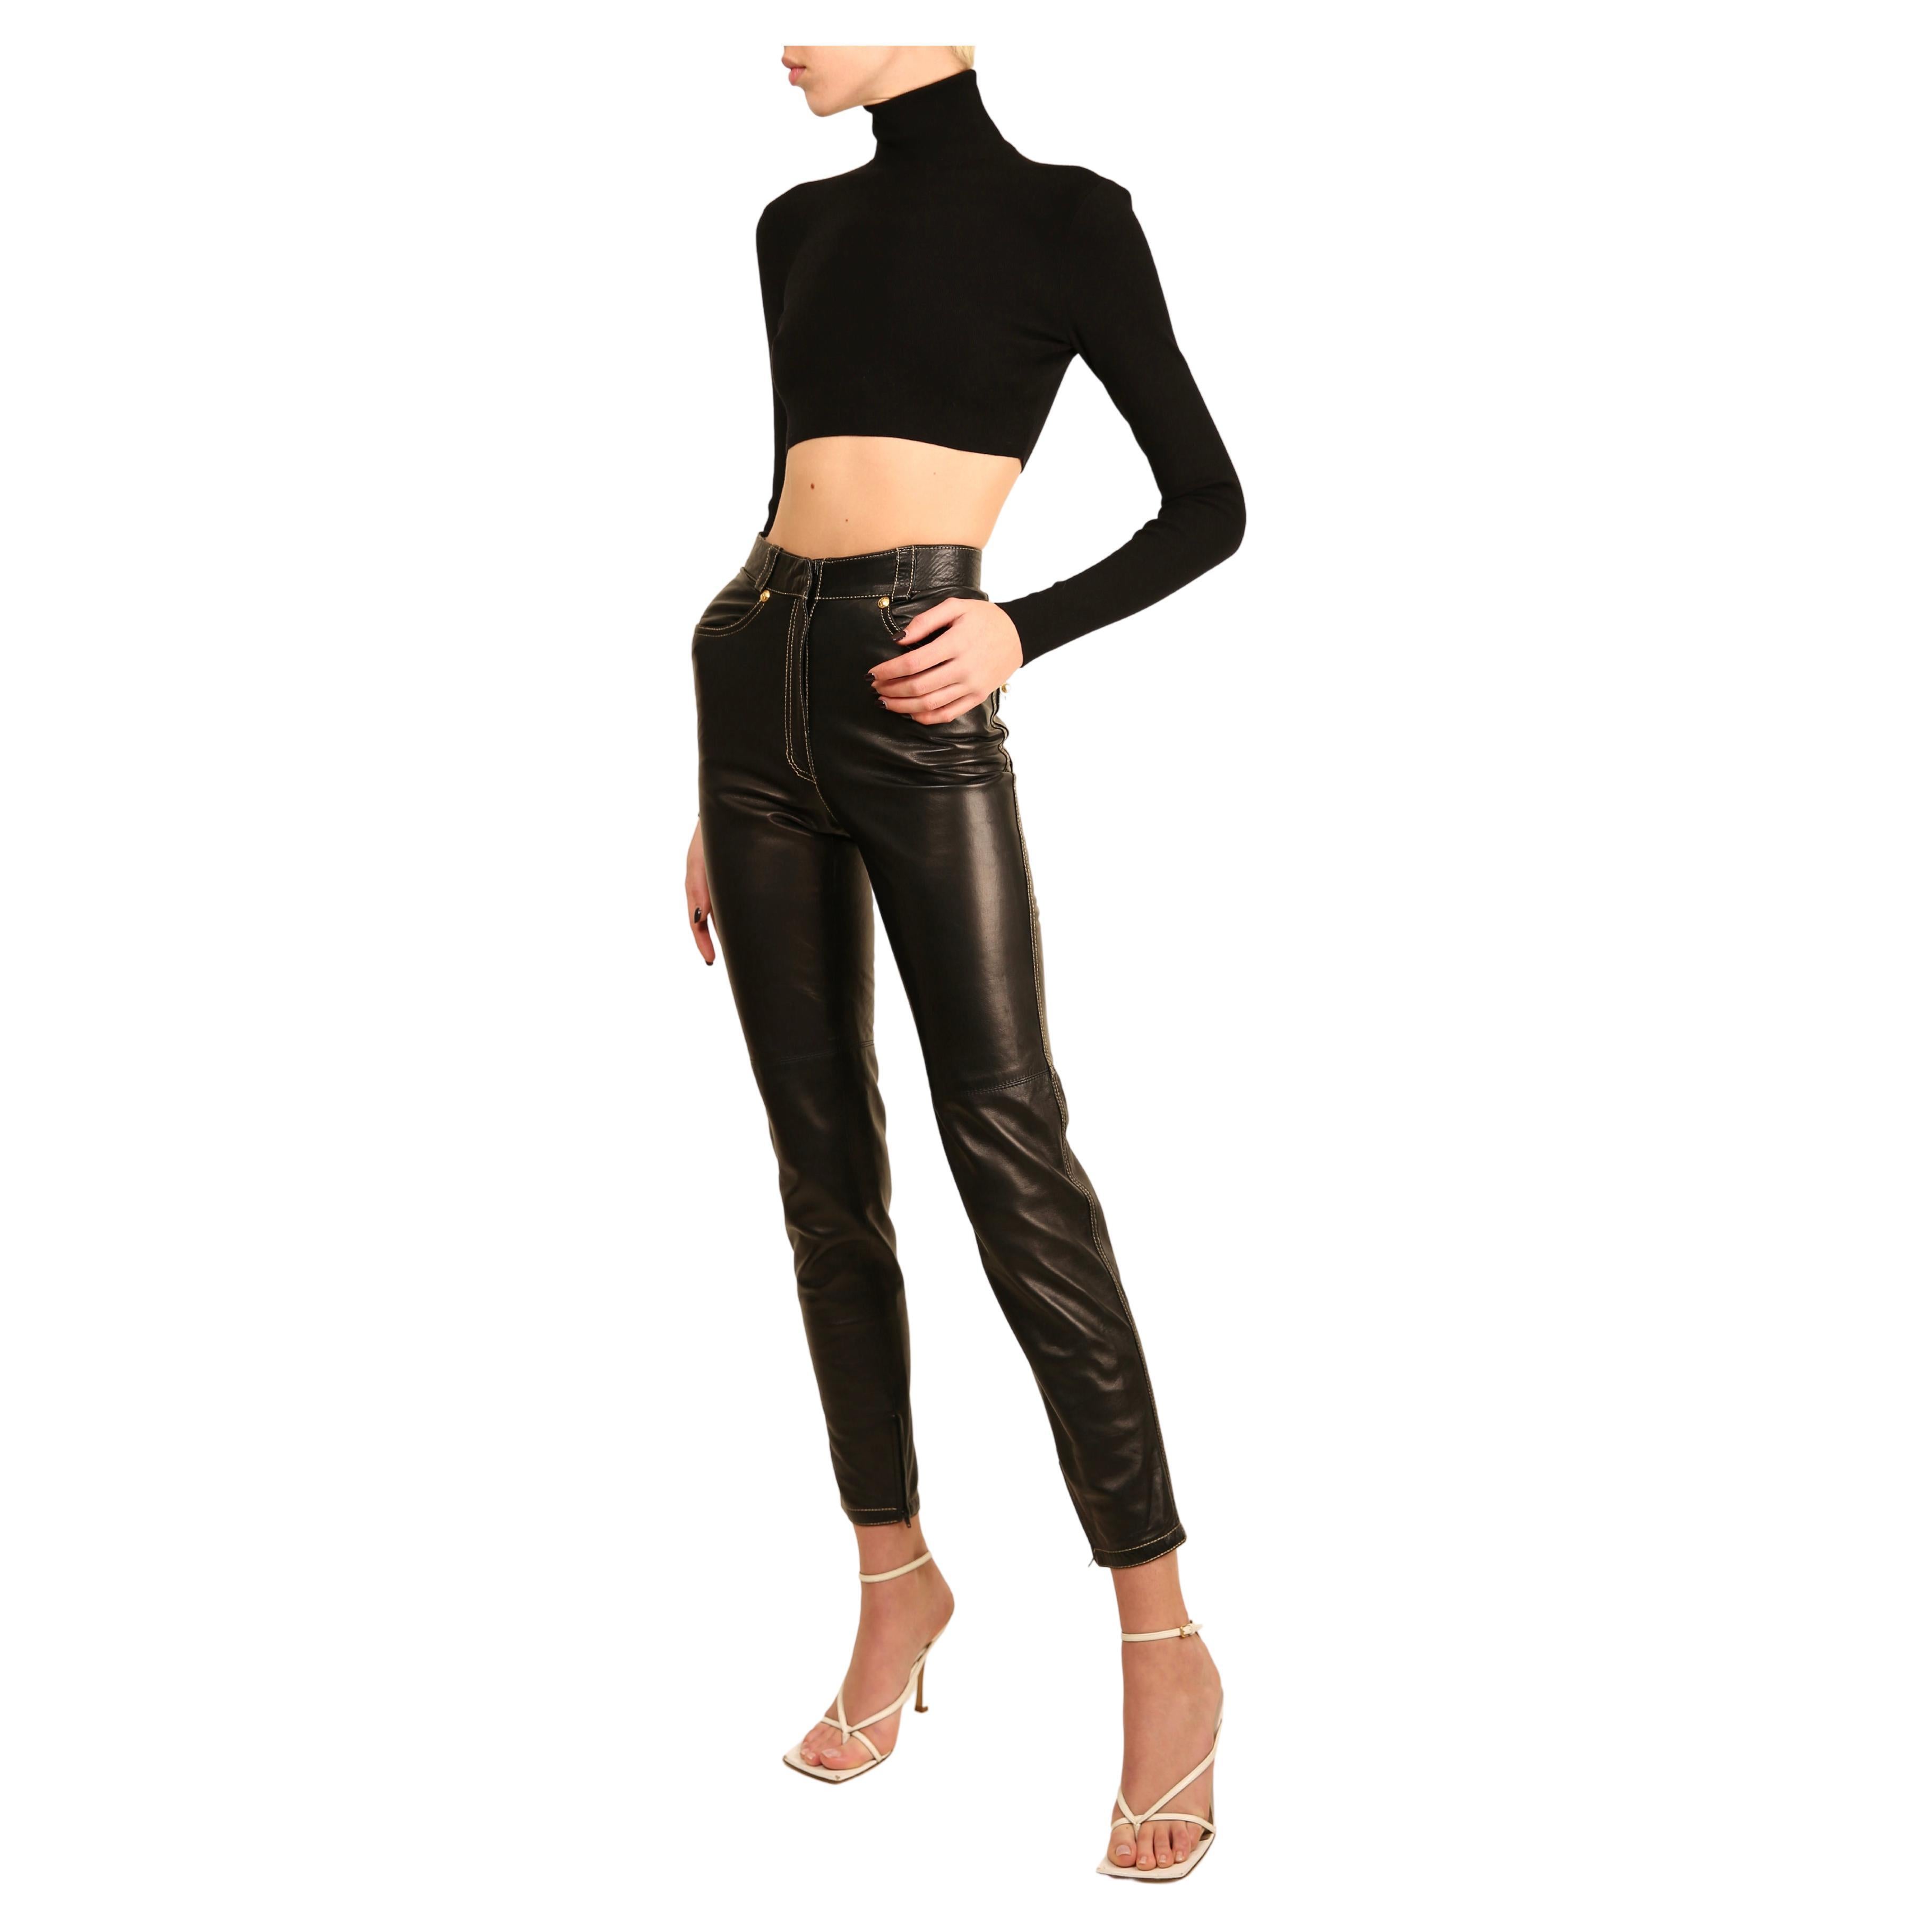 Gianni Versace 1992 black high waisted leather gold stitched medusa pants IT38